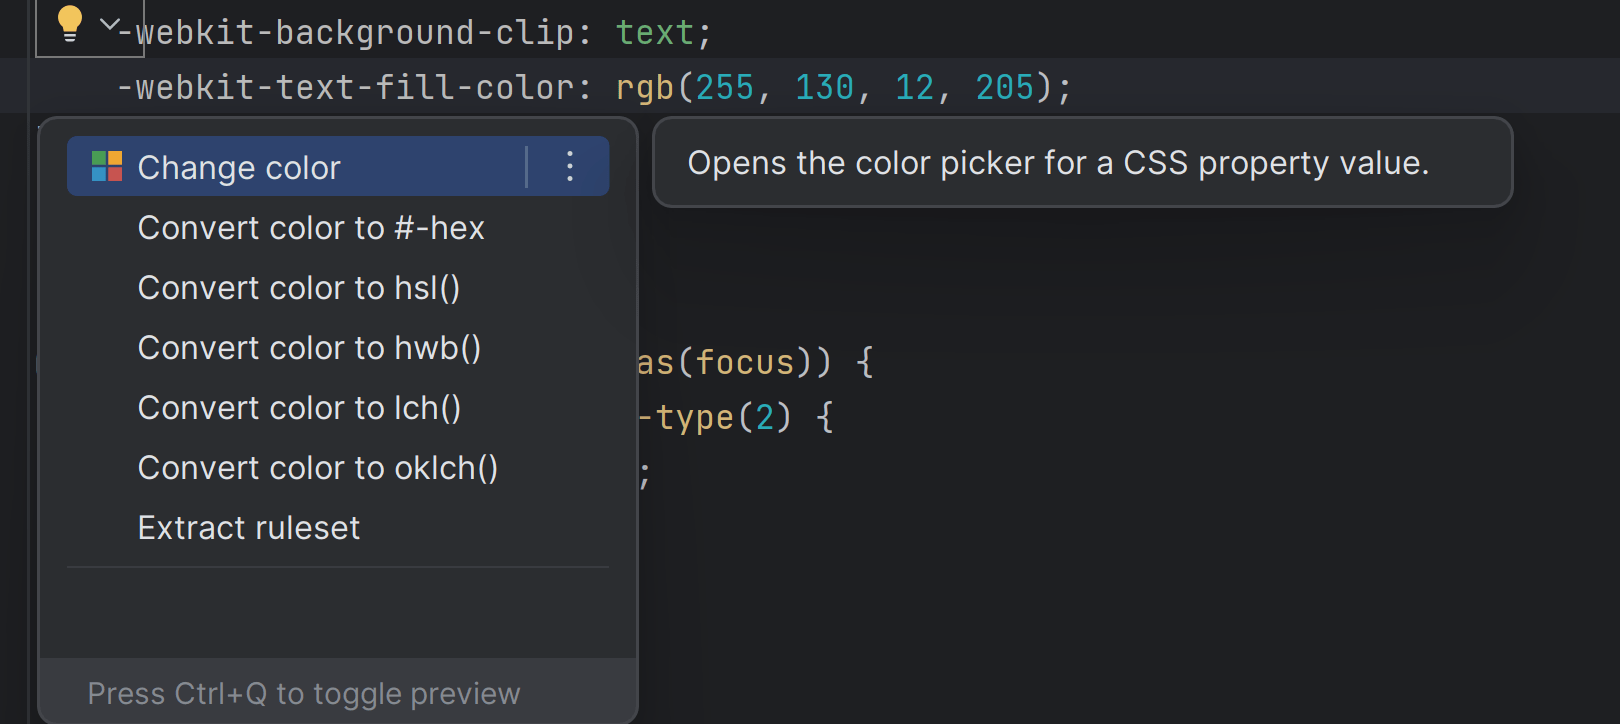 Ability to convert color to lch and oklch